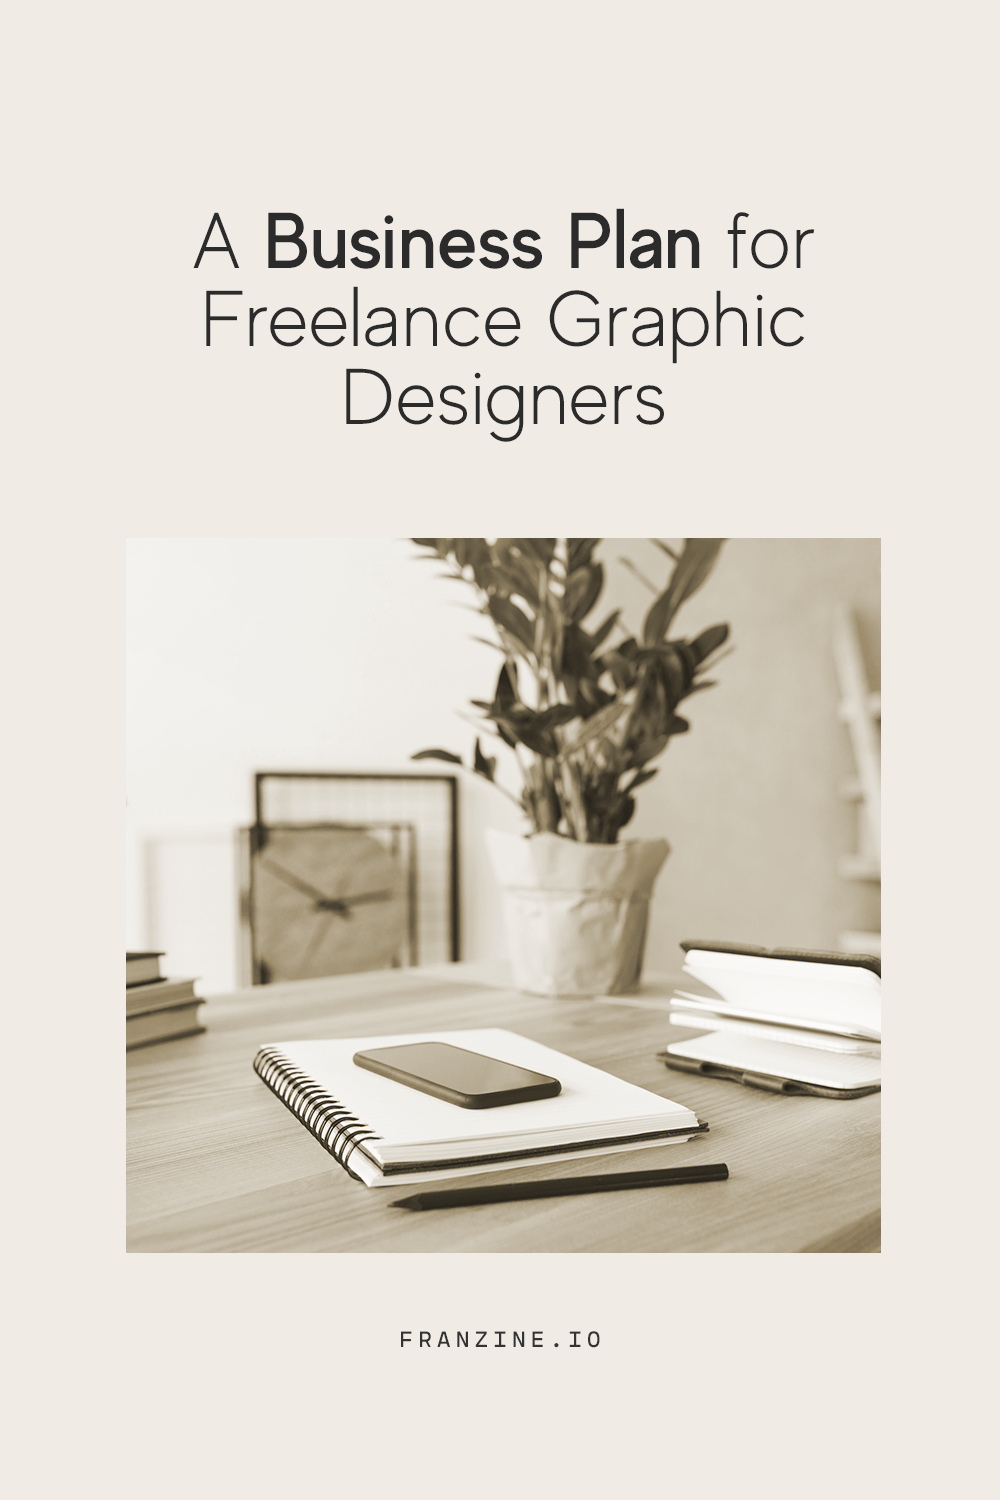 A desk photo with the text "A Business Plan for Freelance Graphic Designers" 